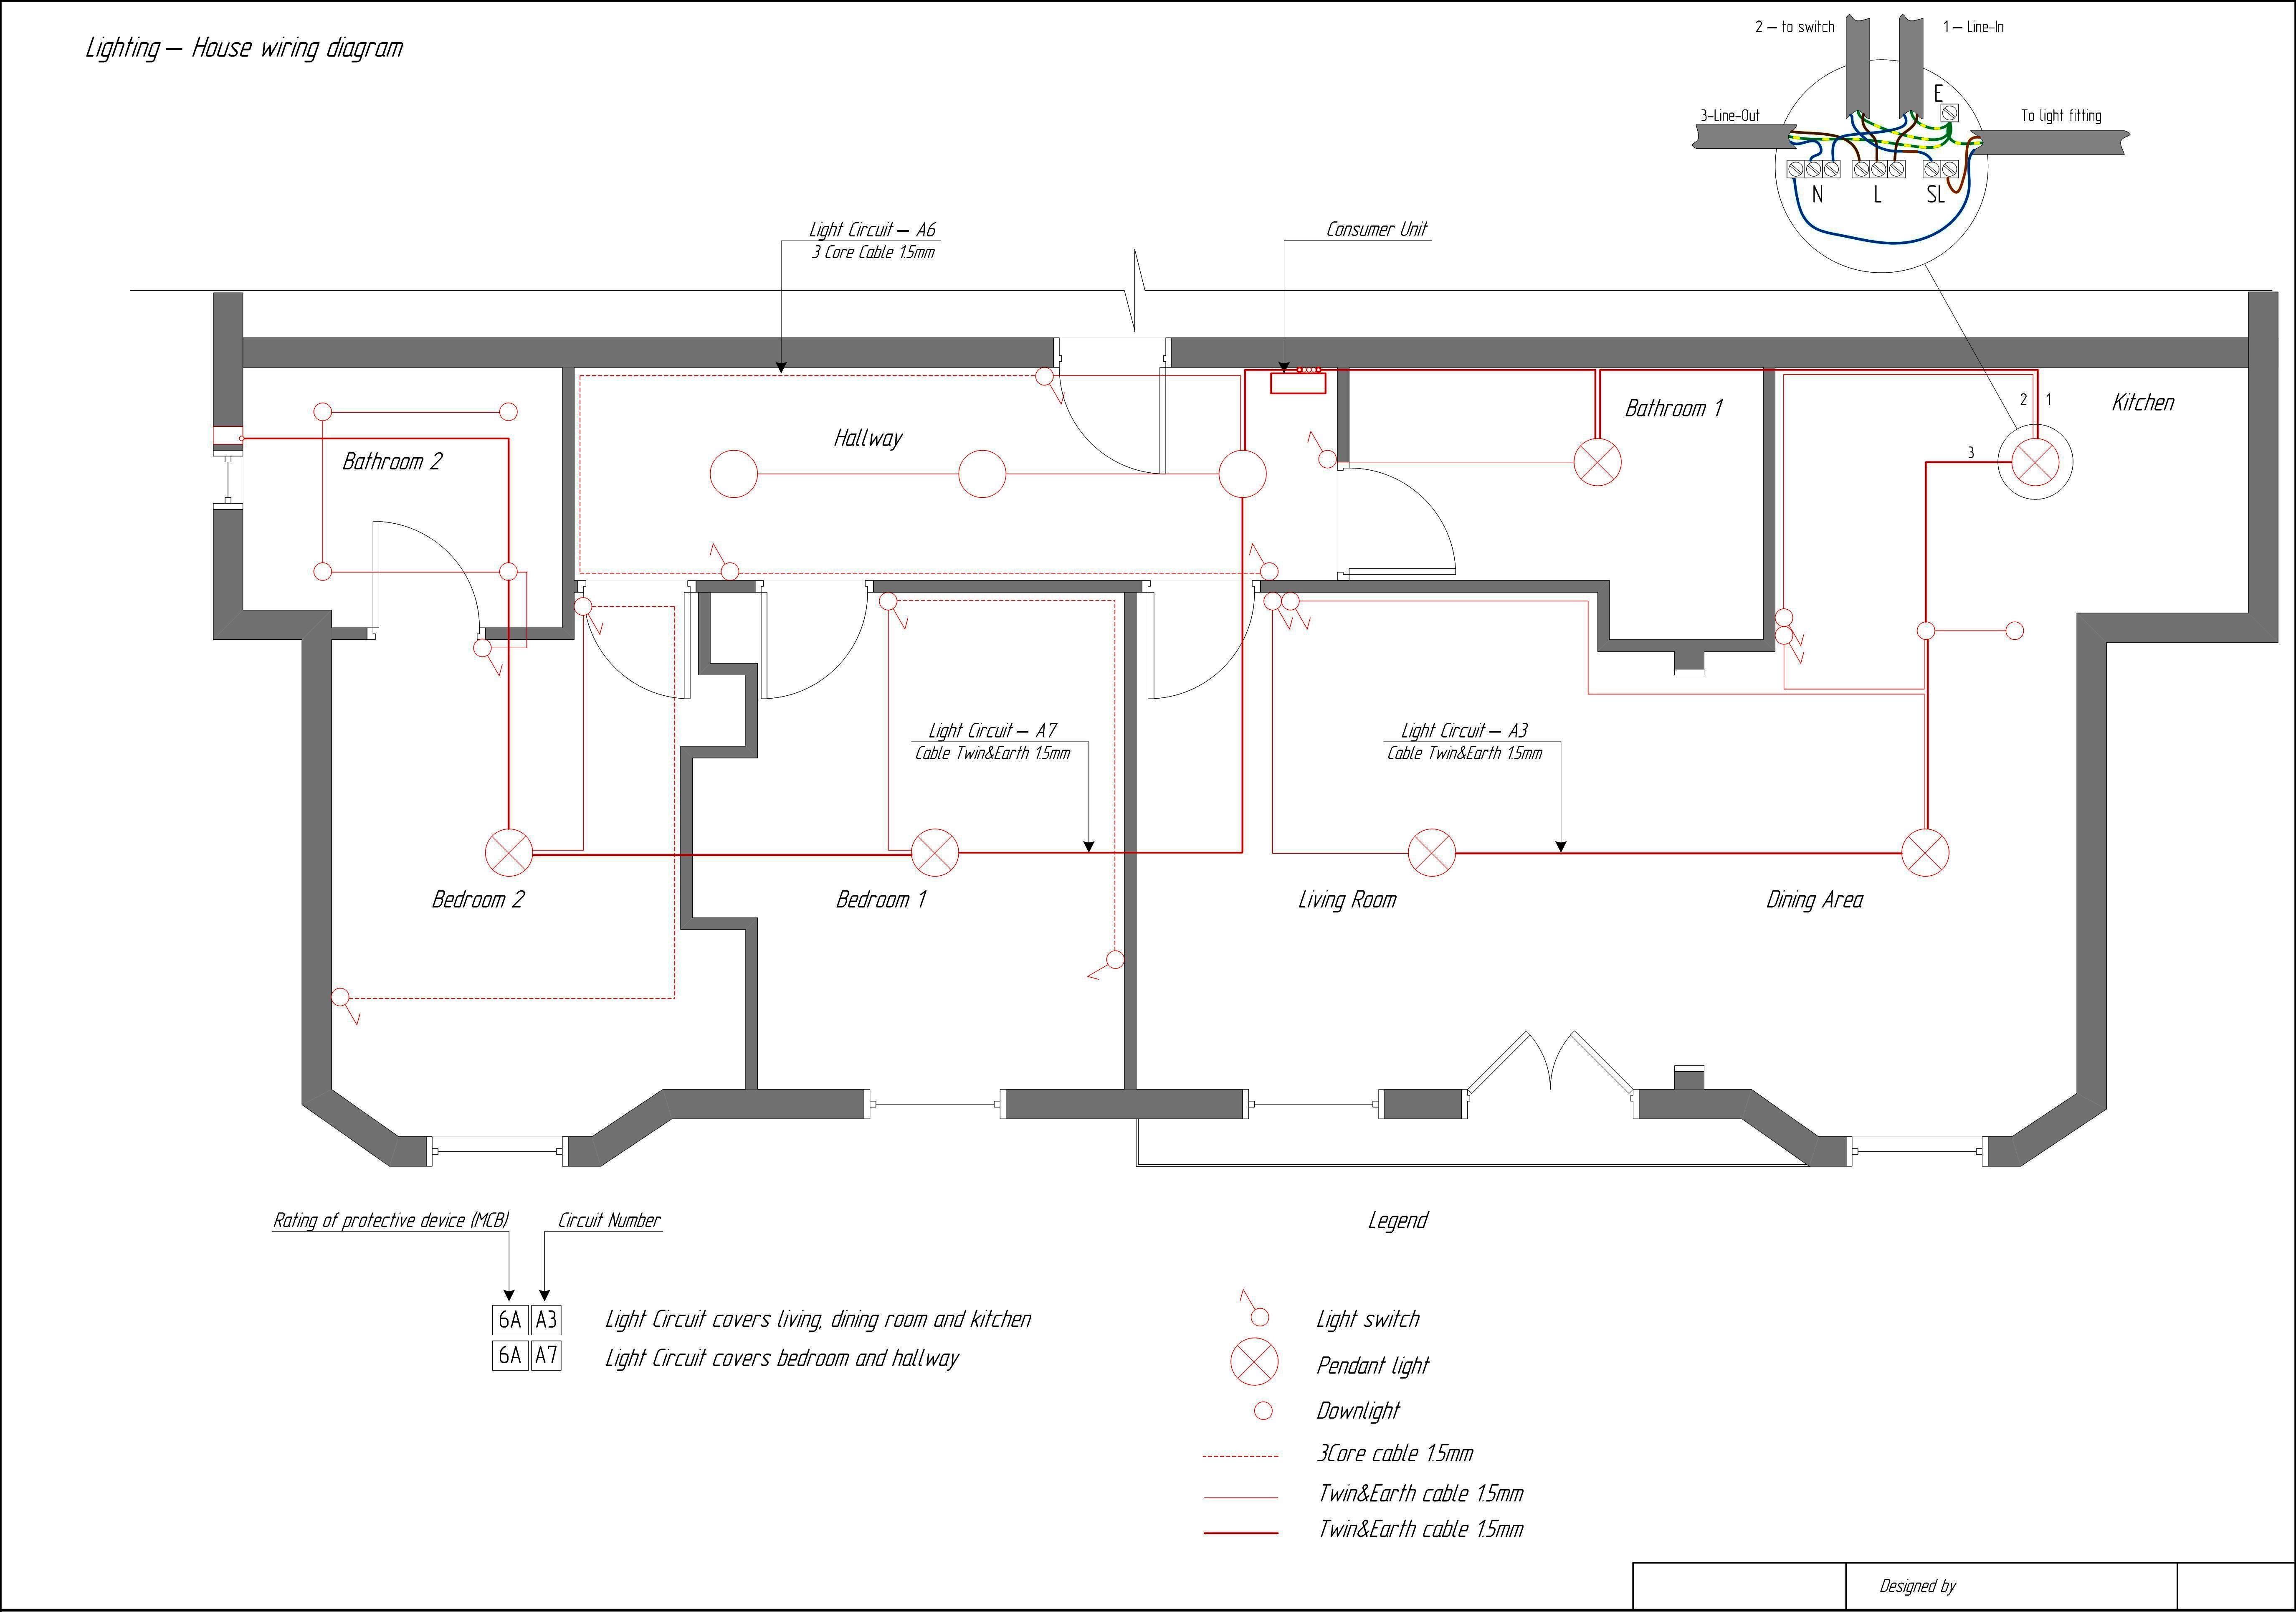 House Wiring Diagram Most monly Used Diagrams For Home Wiring In 14 2 Wiring A Room Bedroom Wiring Diagram